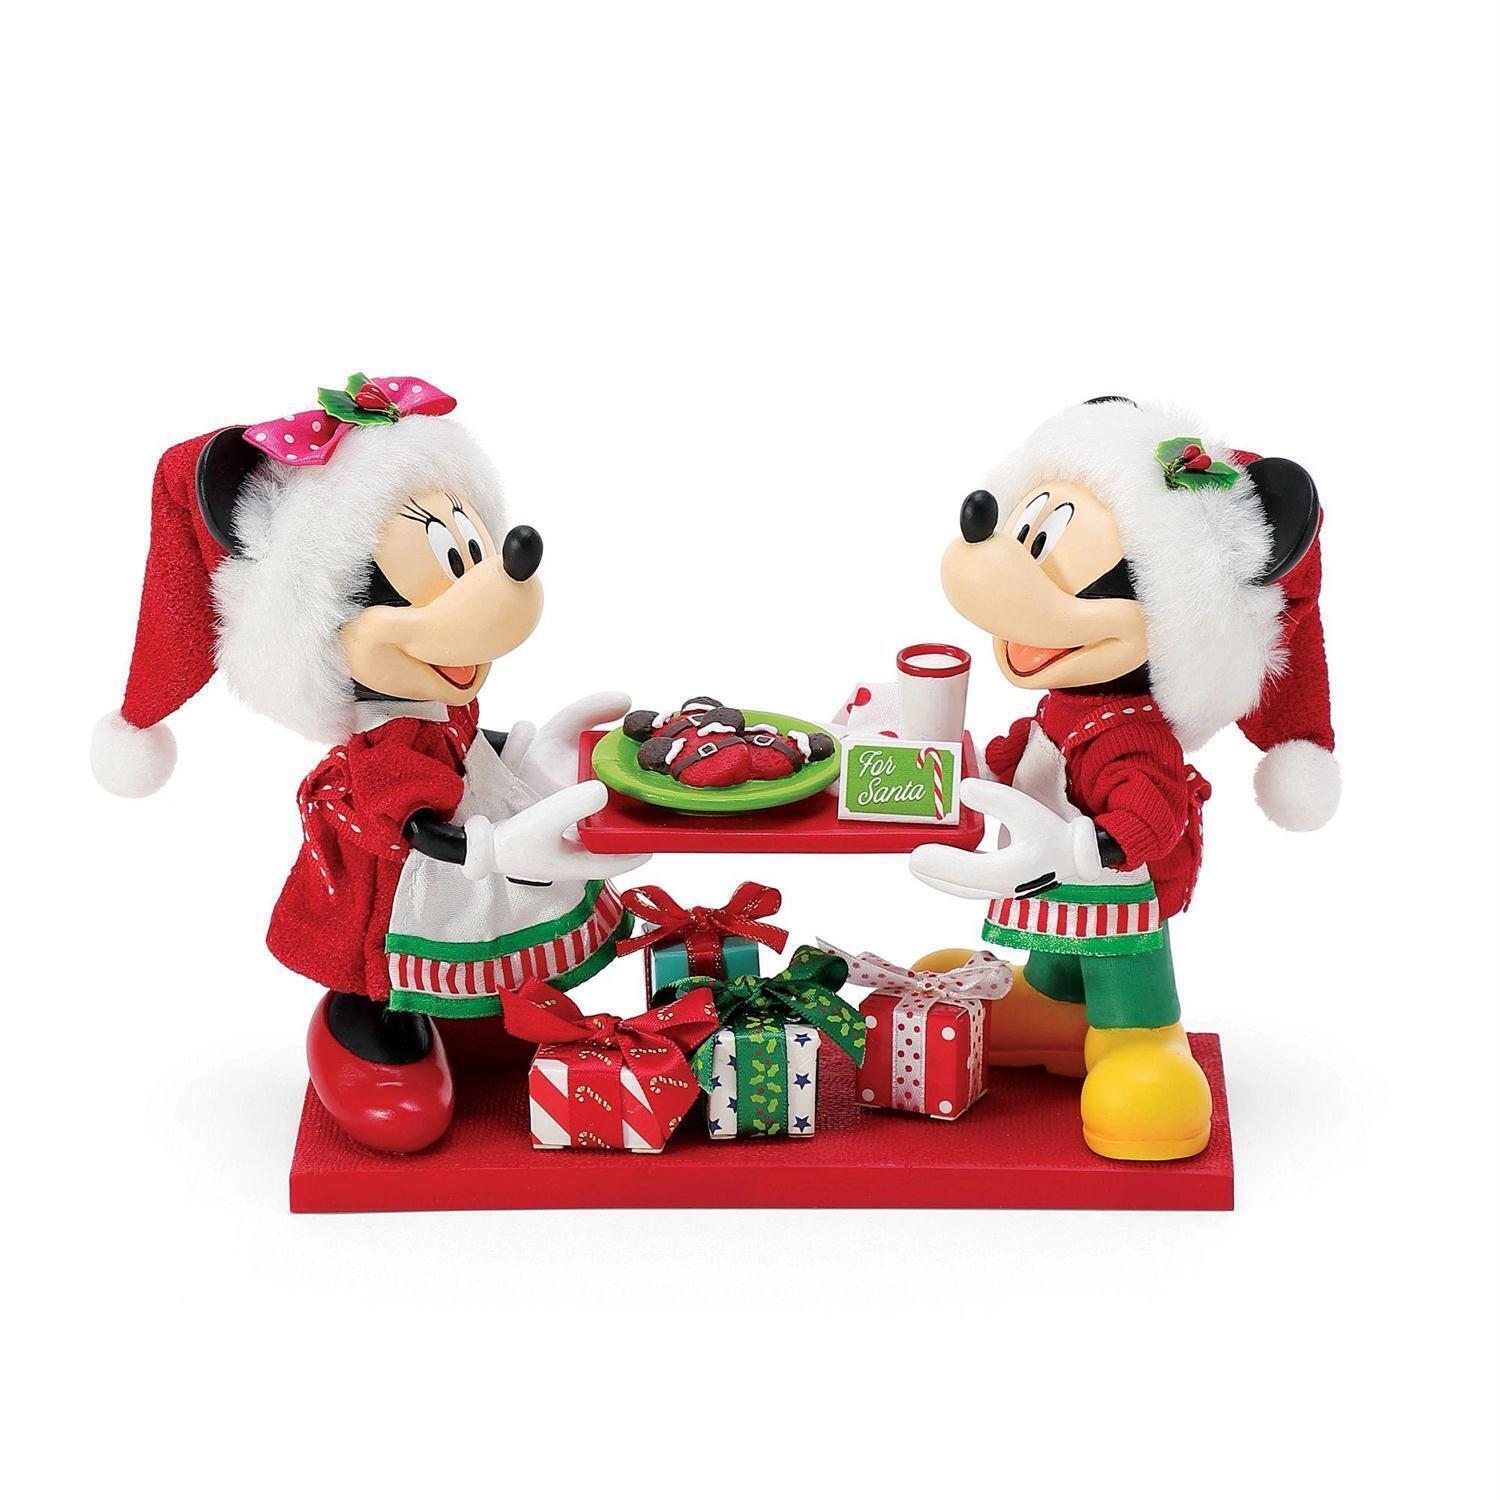 Dept 56 Possible Dreams MICKEY AND MINNIE FRESH BAKED FOR SANTA 6010204 Disney